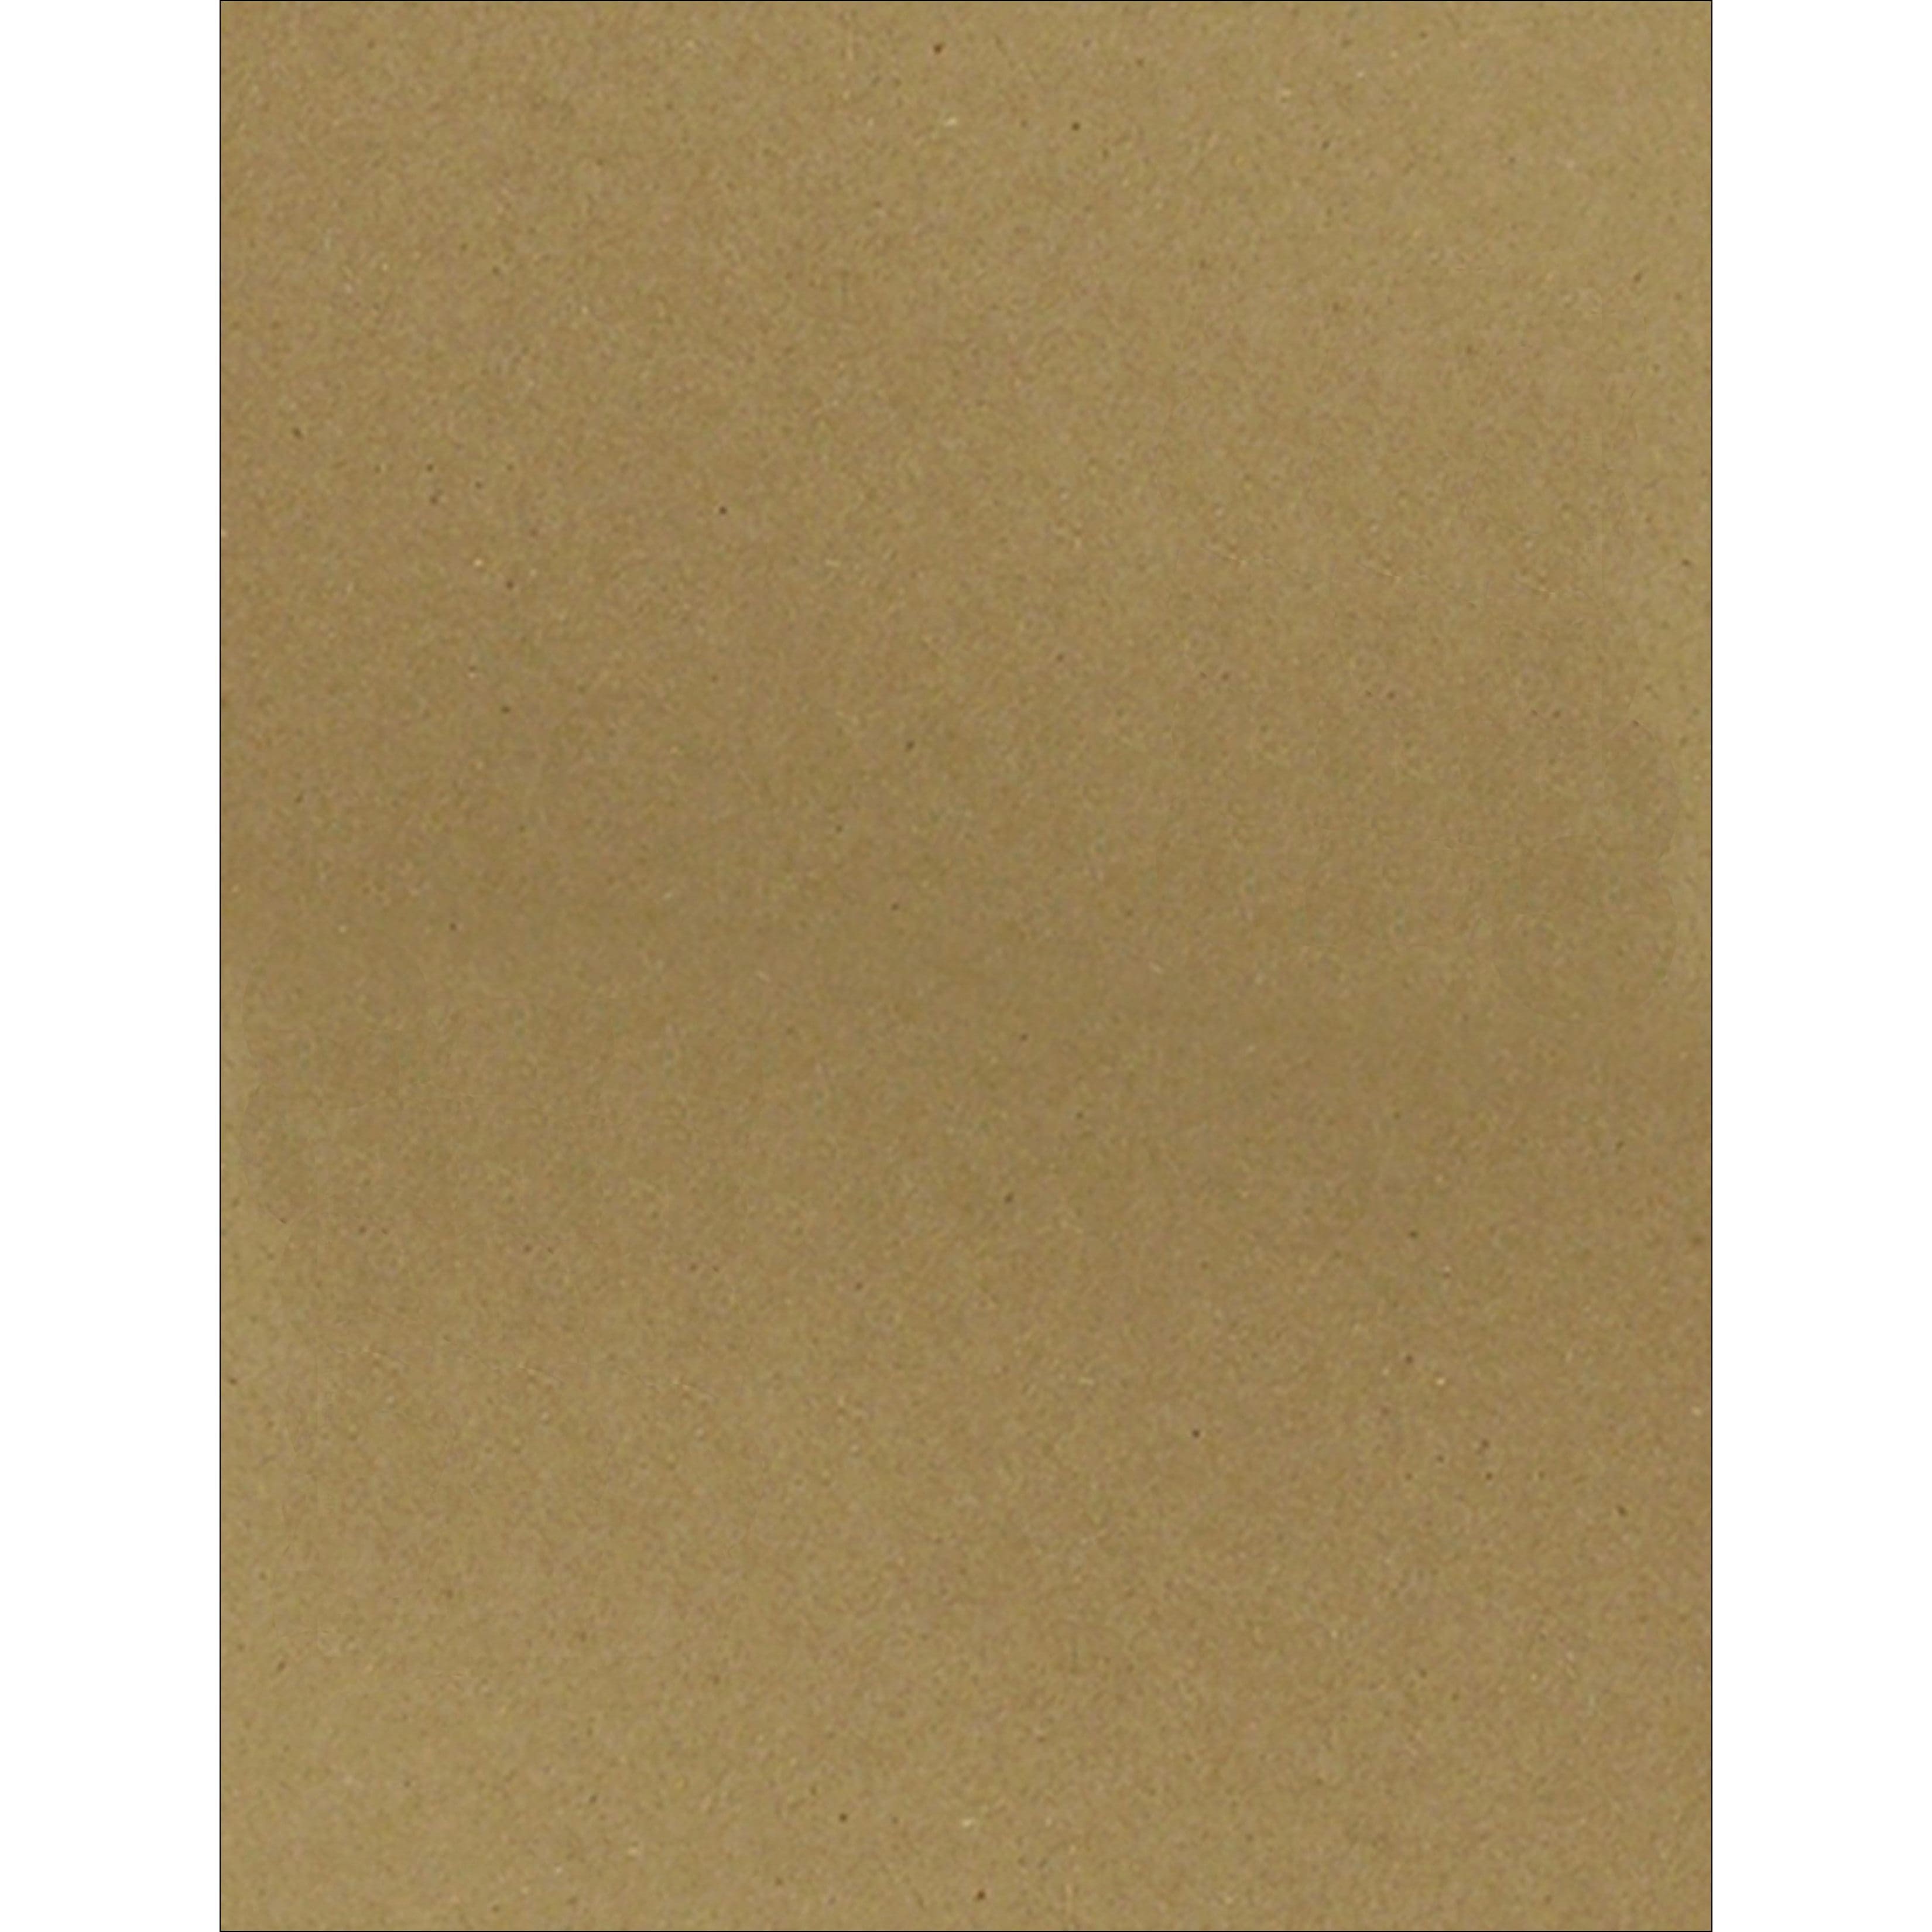 PA Paper™ Accents 8.5" x 11" Self Adhesive Paper, 25 Sheets